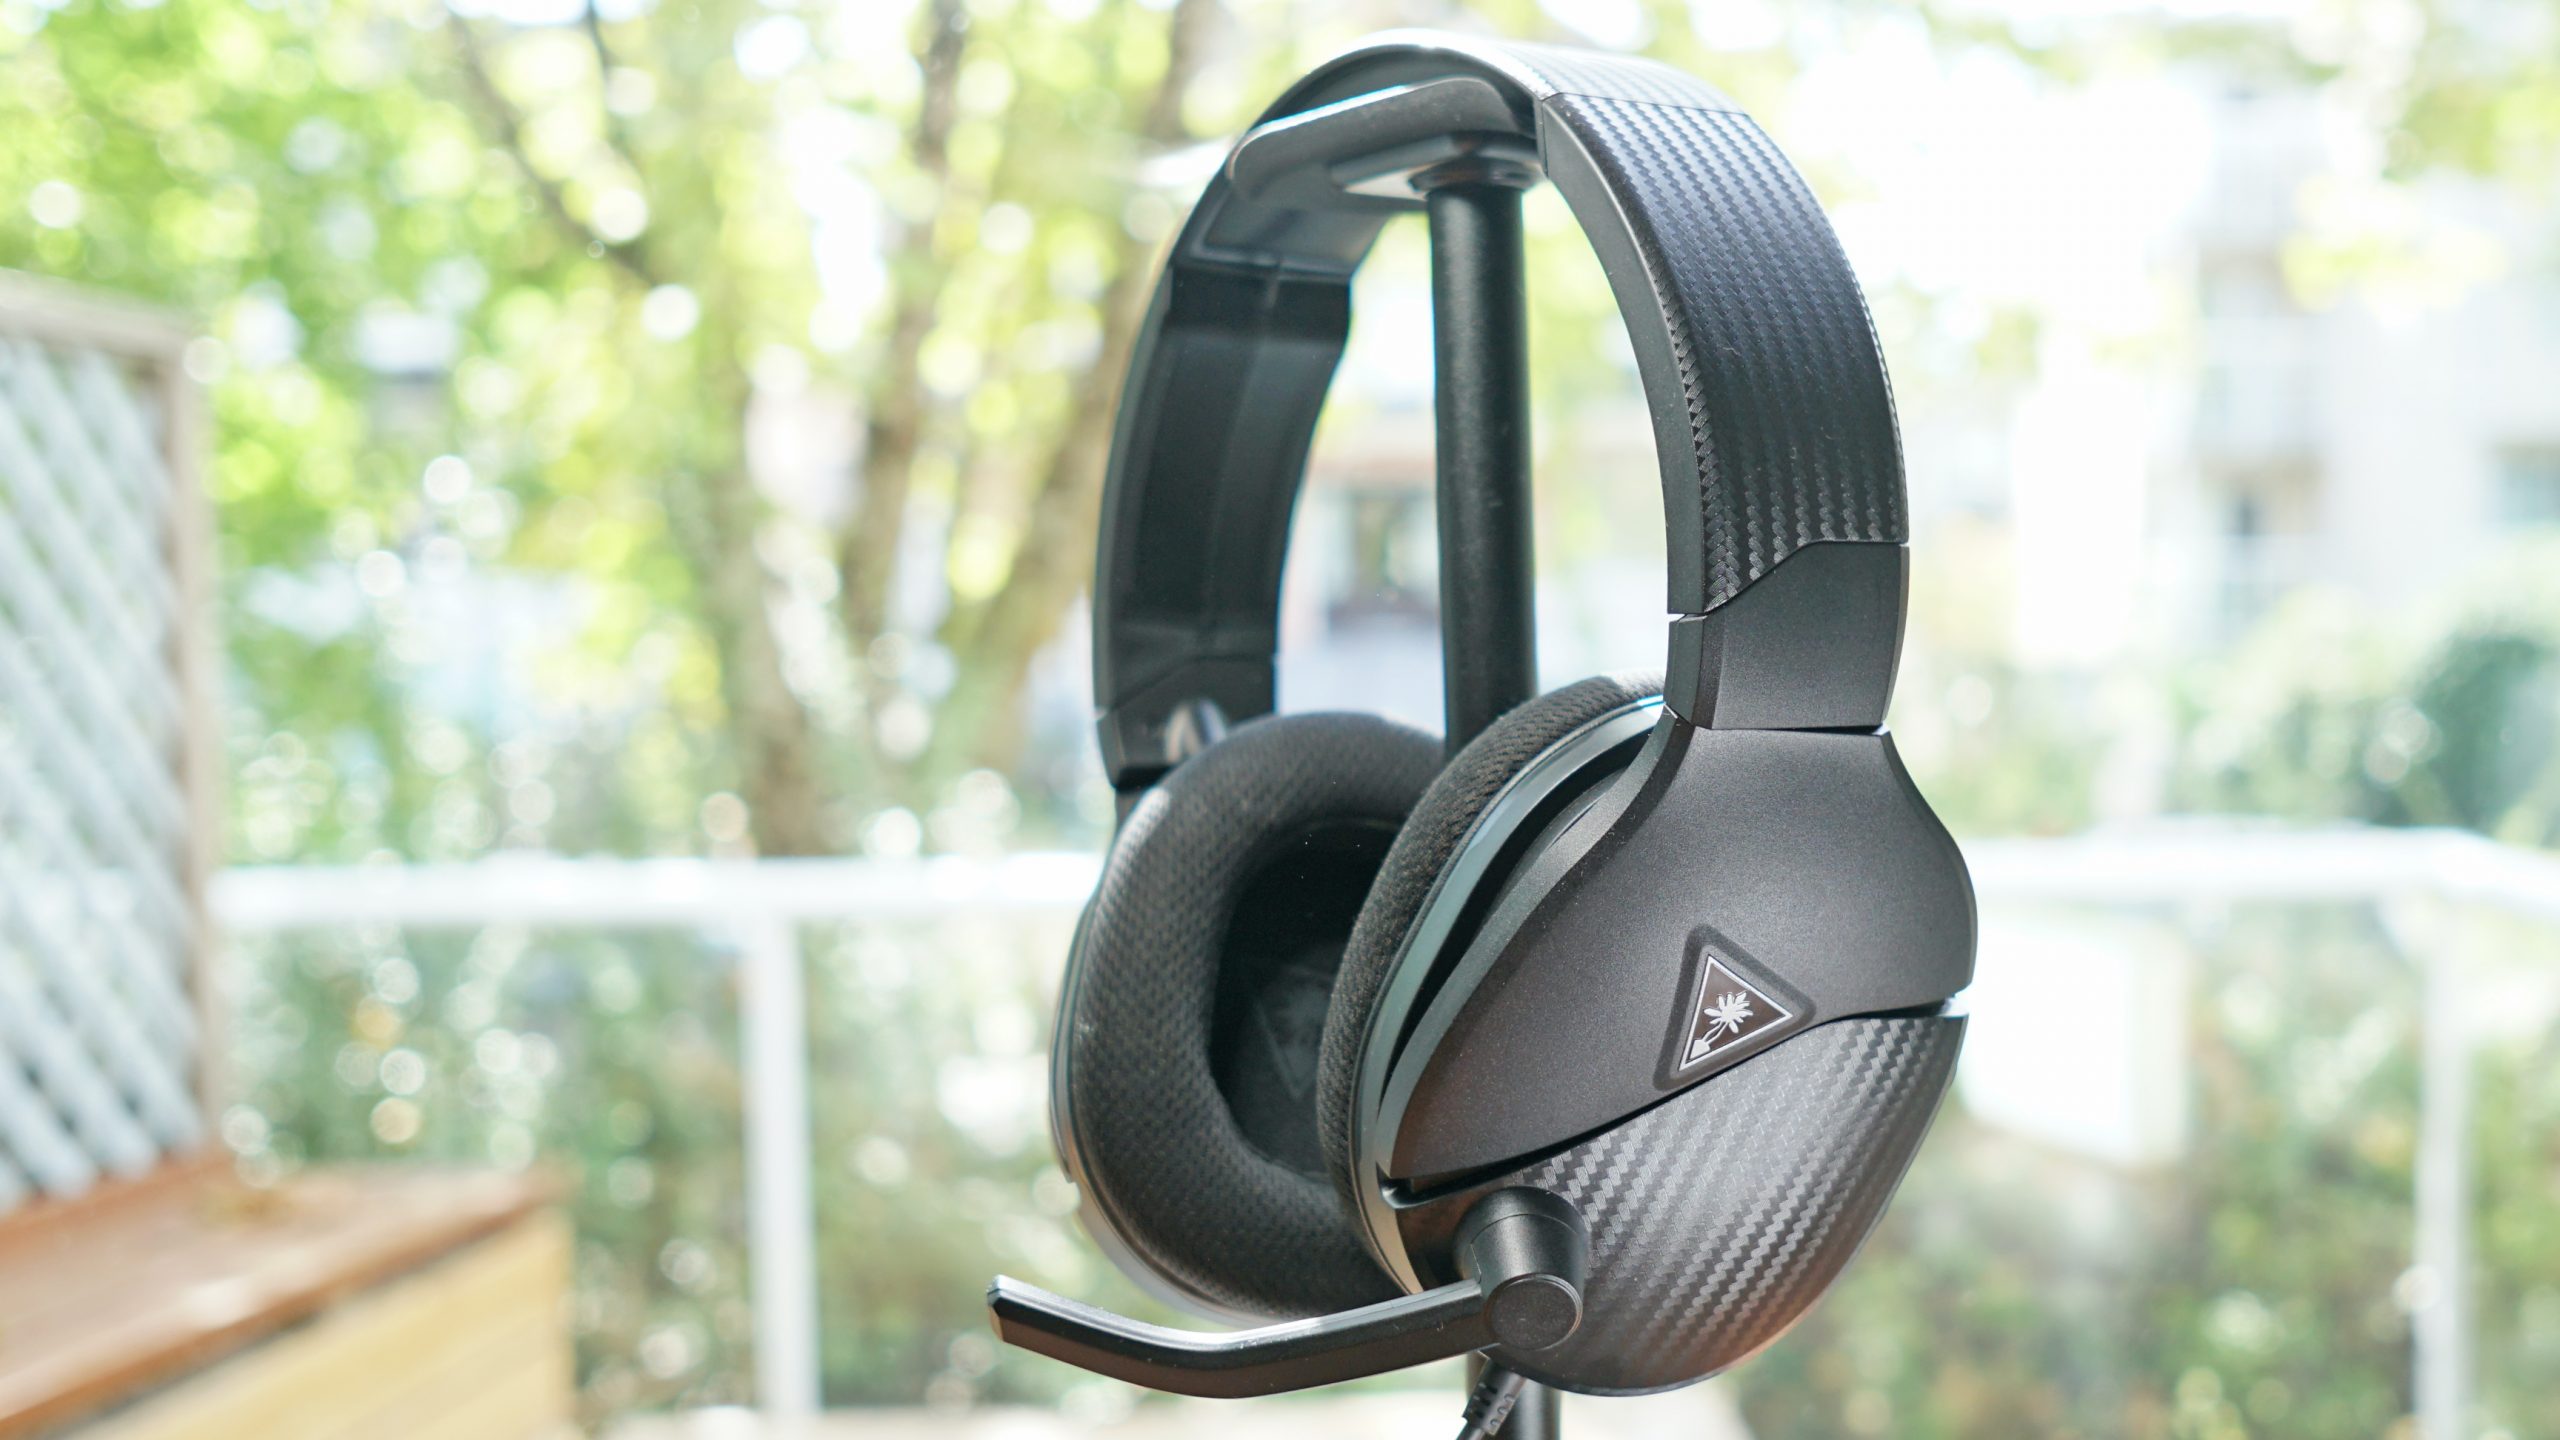 The Turtle beach Recon 200 Gen 2 sits on a headphone stand in front of a window.